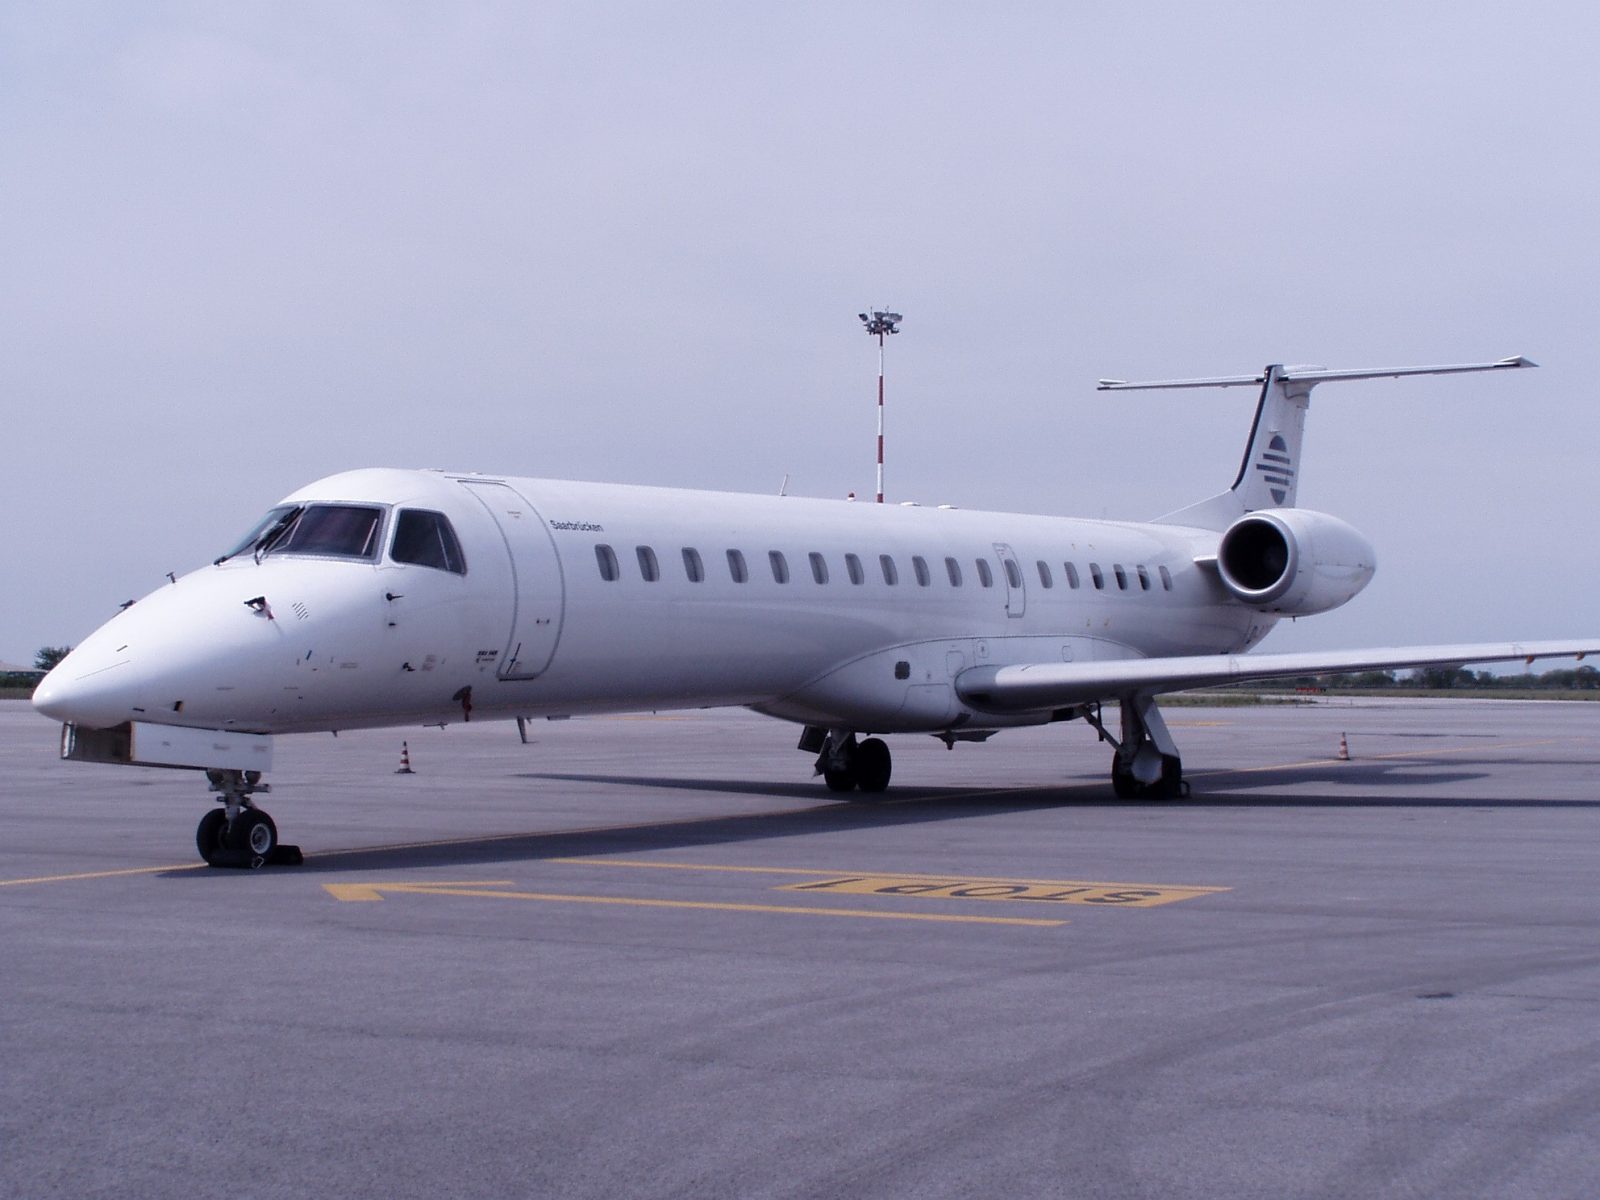 hire-an-embraer-erj-145xr-private-jet-charter